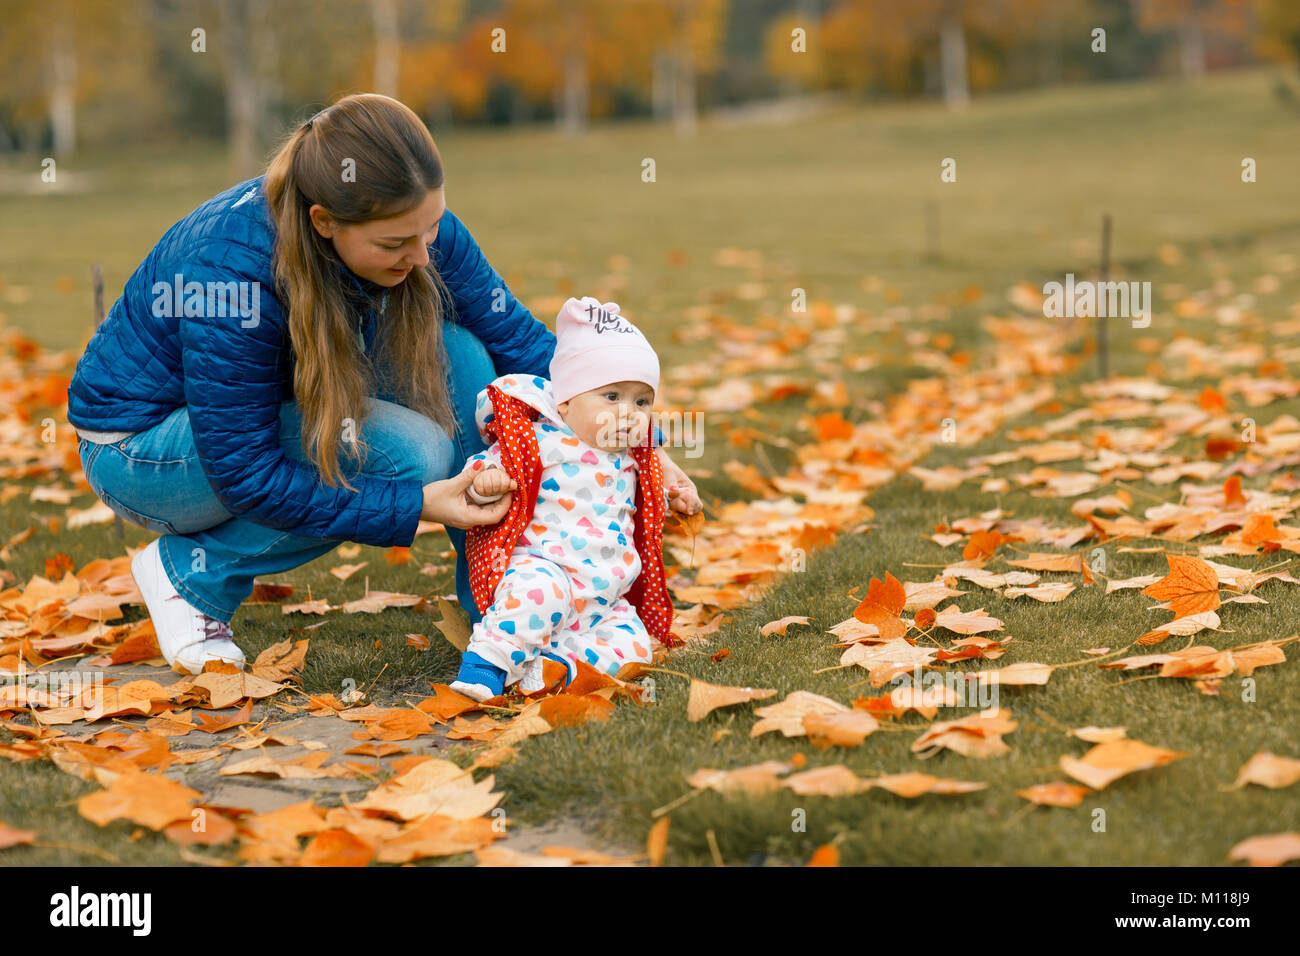 Parent raises his daughter who fell making first steps. Baby girl learning to walk in autumn park. Walking toddler. Stock Photo